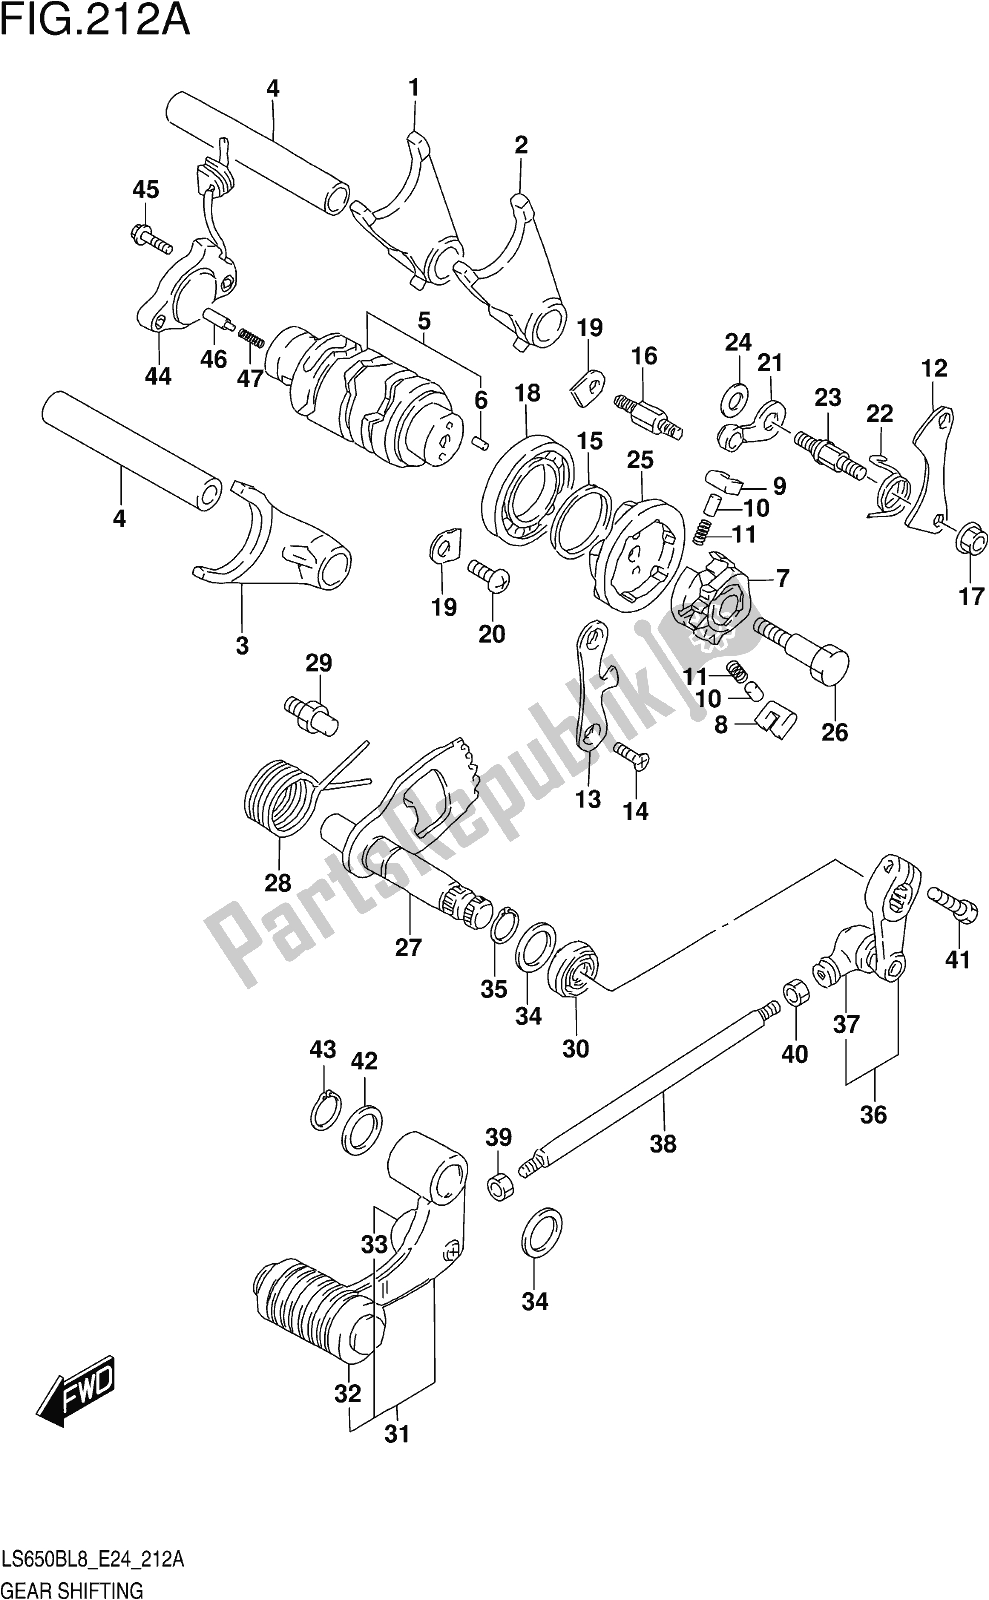 All parts for the Fig. 212a Gear Shifting of the Suzuki LS 650B 2018